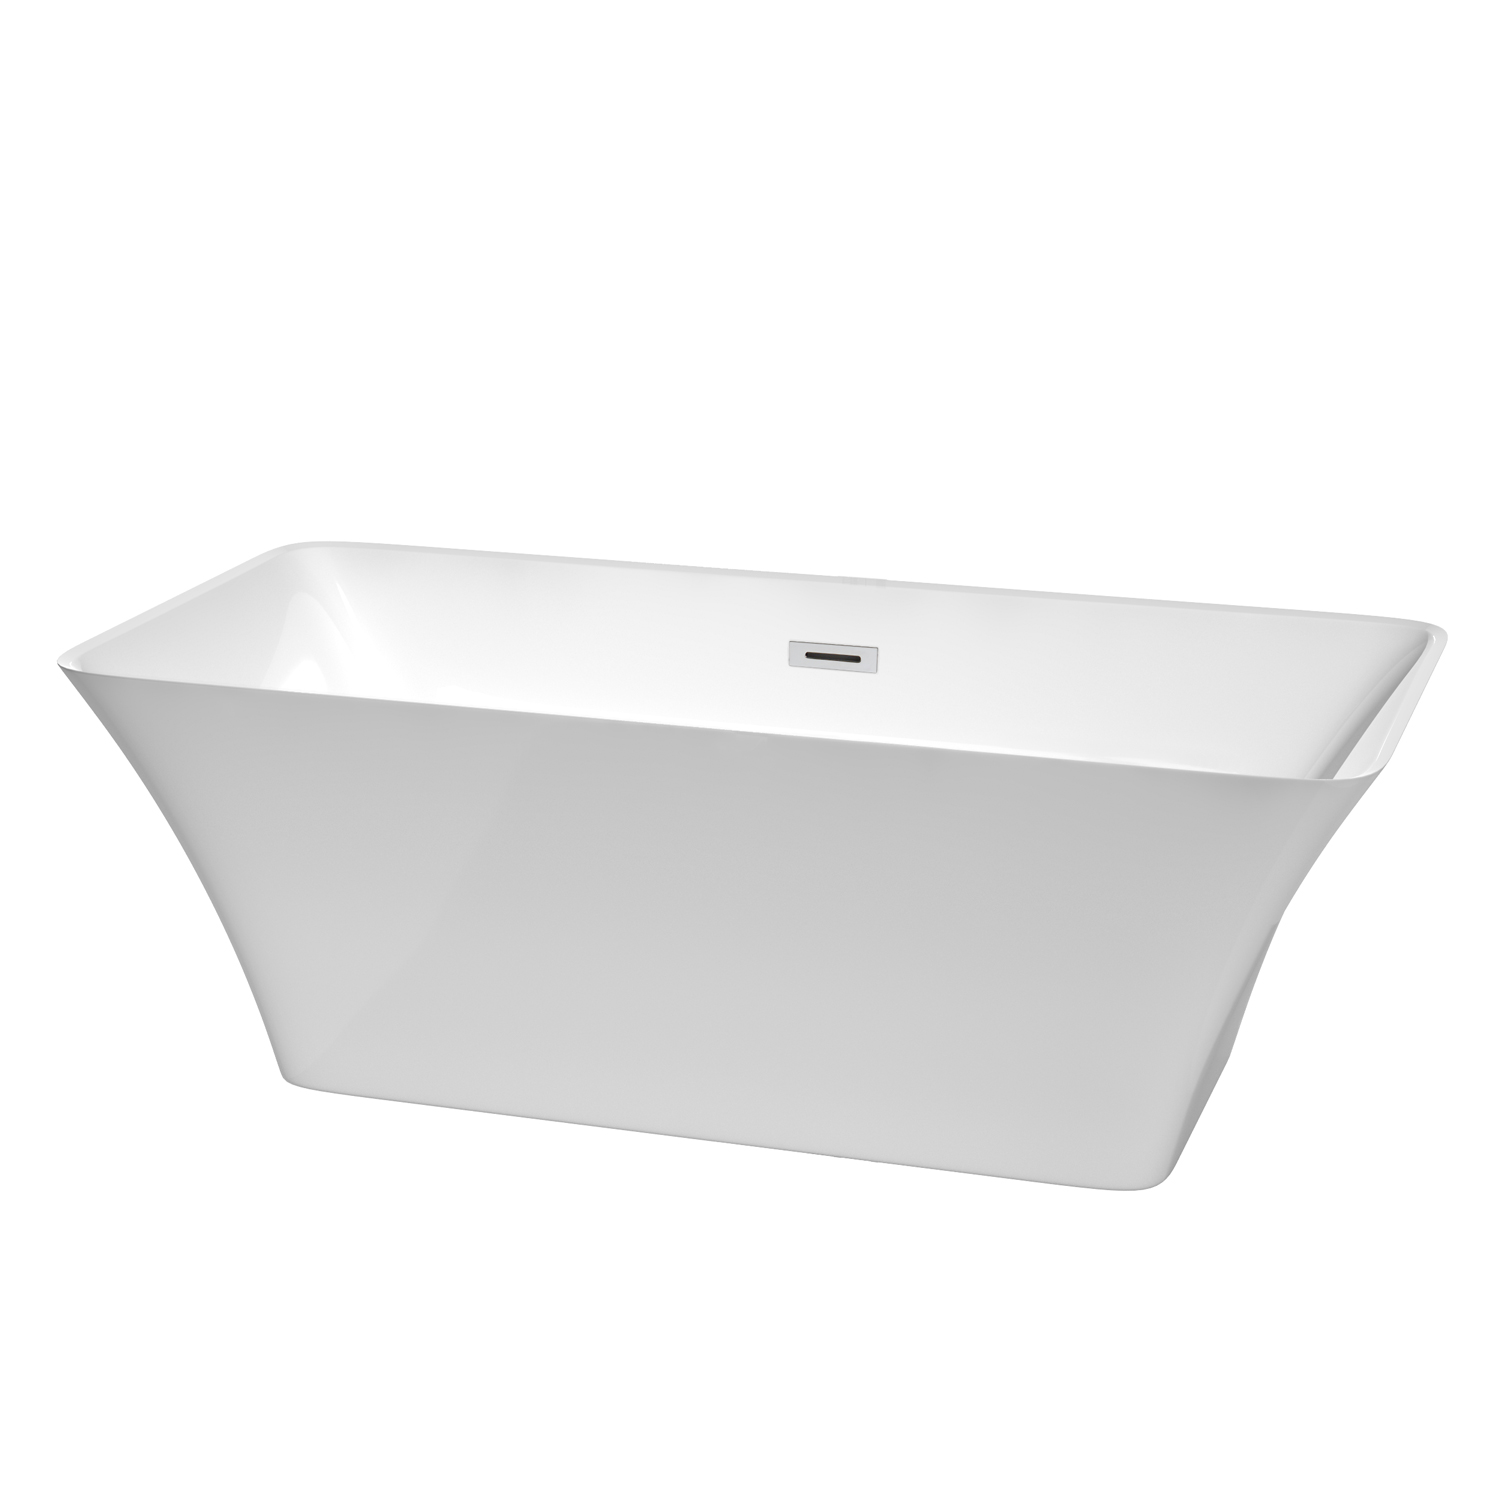 67" Freestanding Bathtub in White with Polished Chrome Drain and Overflow Trim w/ Faucet Option